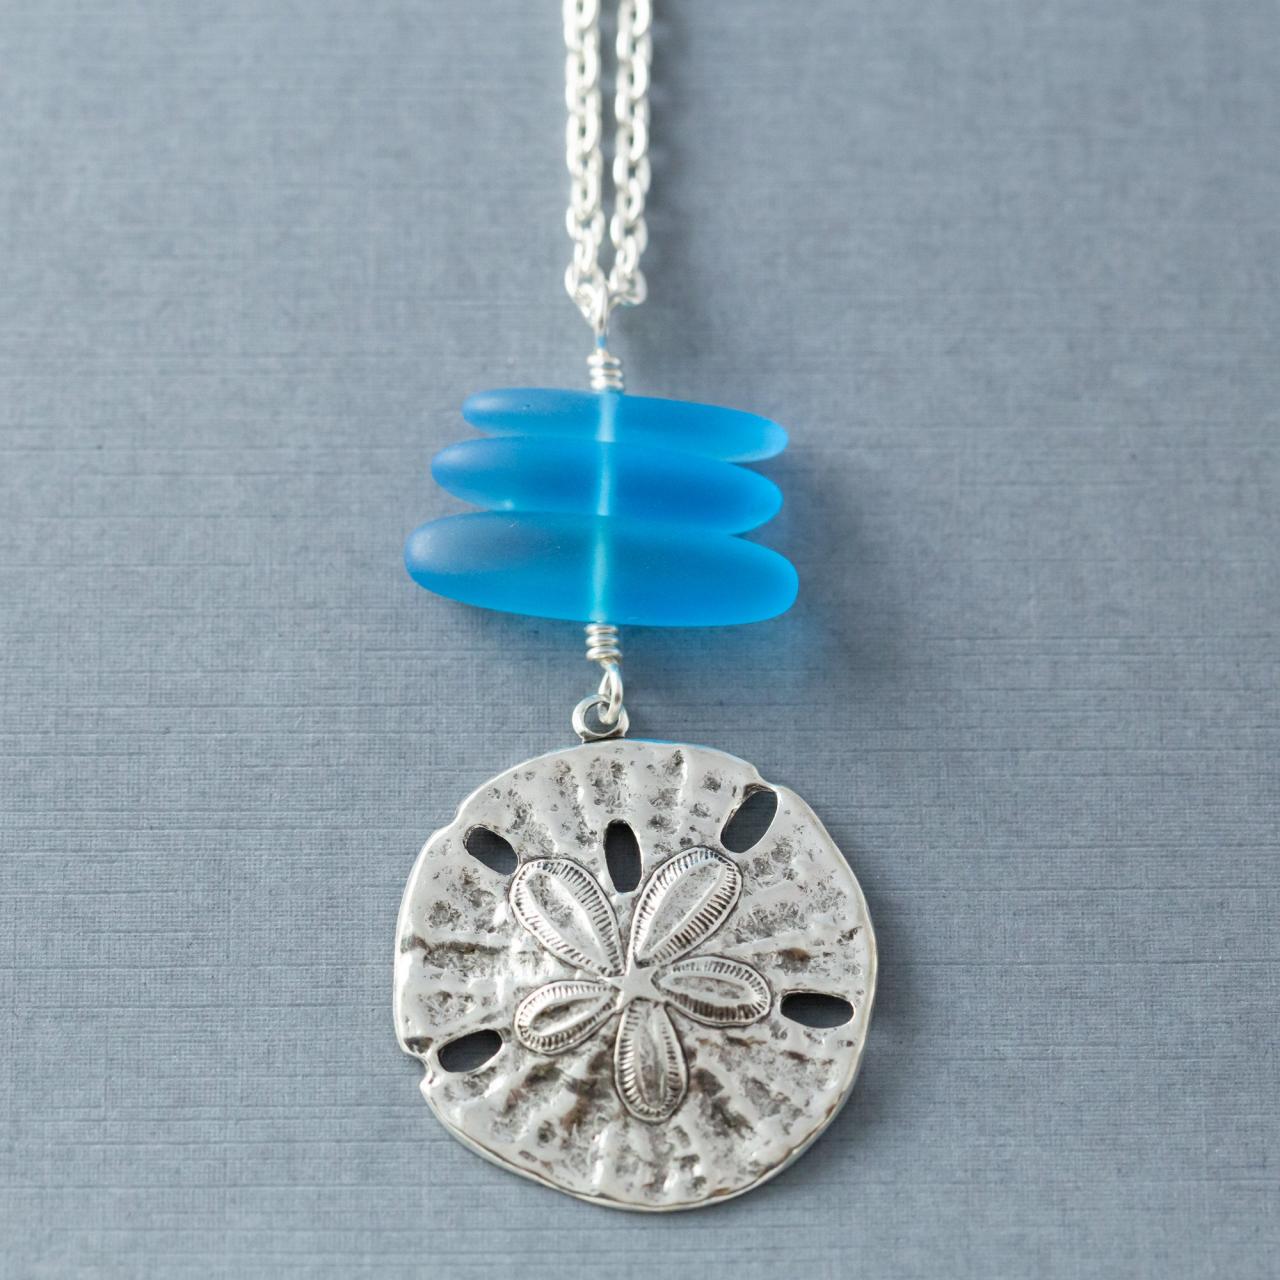 Silver Sand Dollar Pendant Necklace, Sand Dollar Necklace, Sanddollar Necklace, Blue Sea Glass Necklace, Ocean Necklace, Beach Jewelry